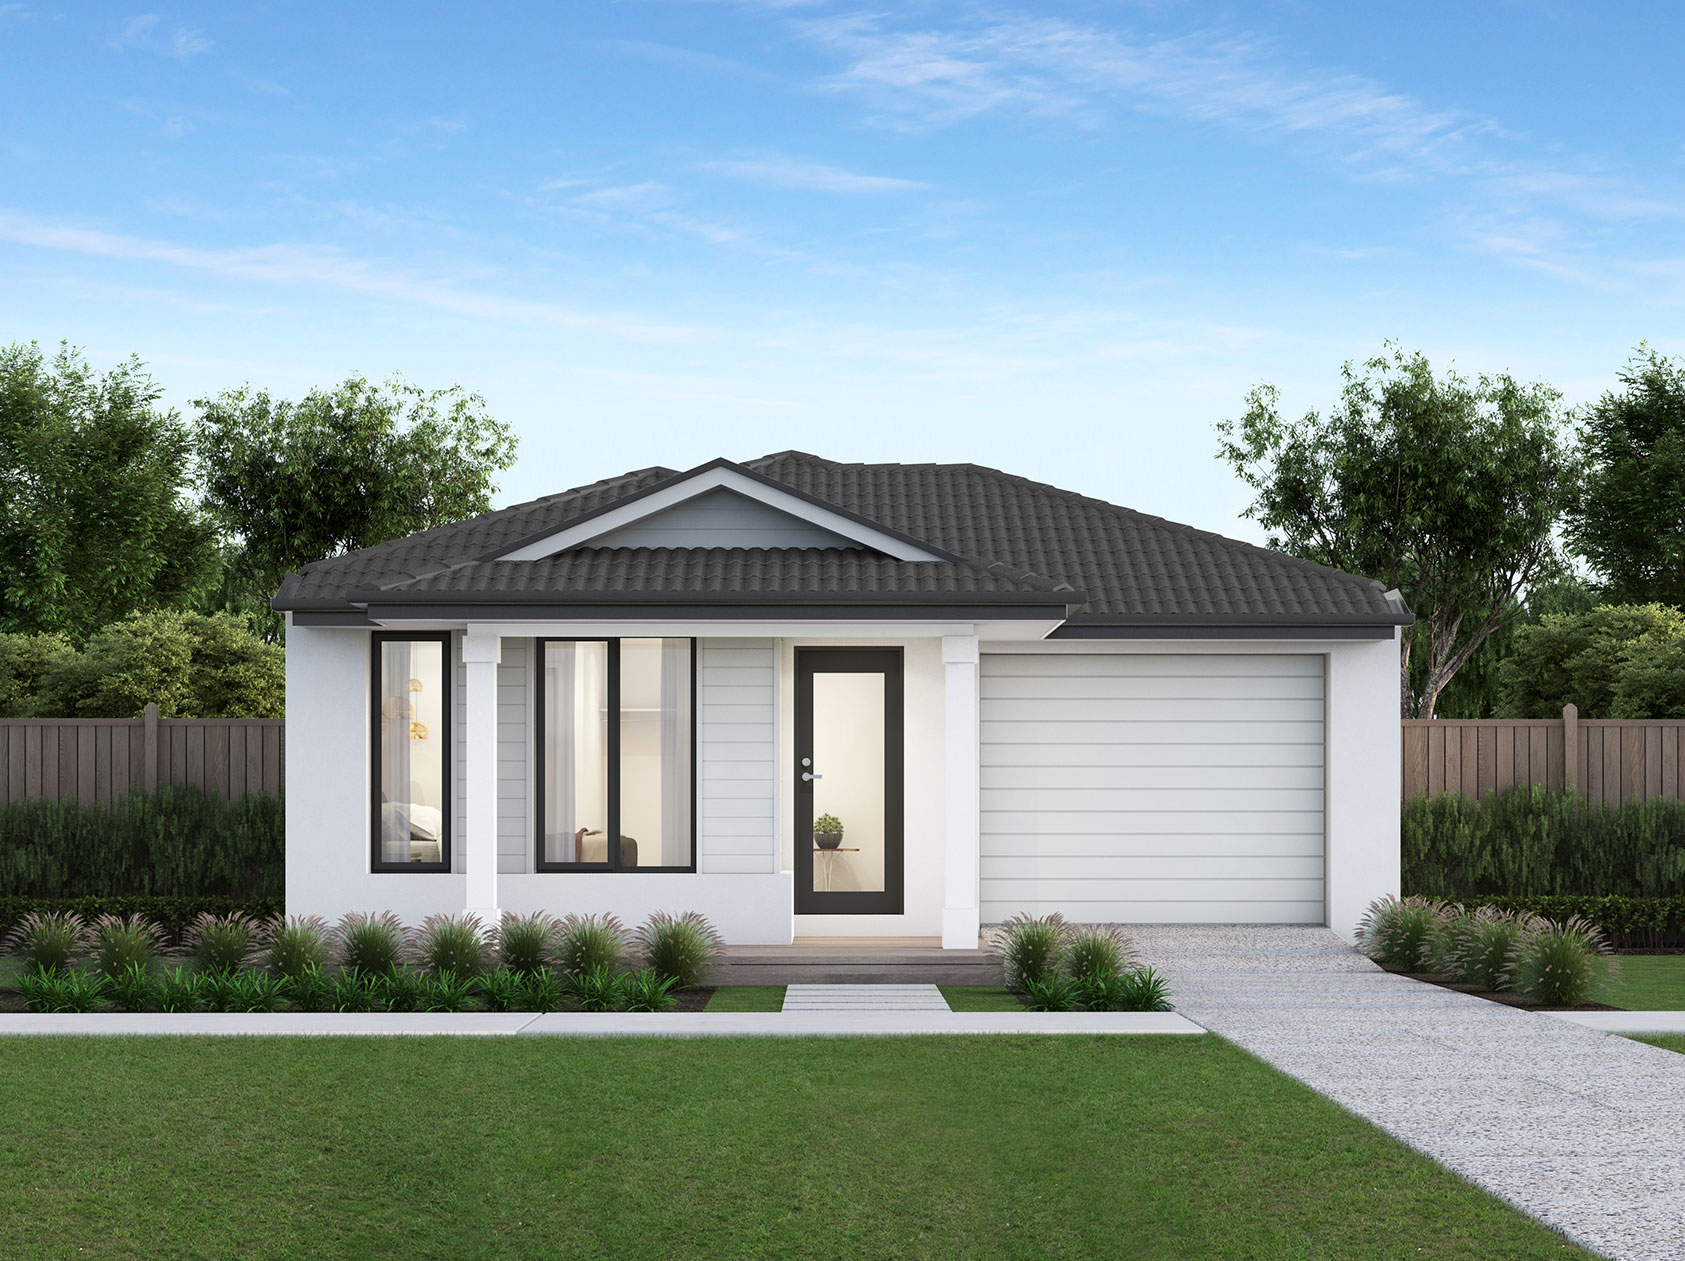 Cooper a 3 bedroom 2 bathroom Melbourne home design and floor plans from Homebuyers Centre Victoria